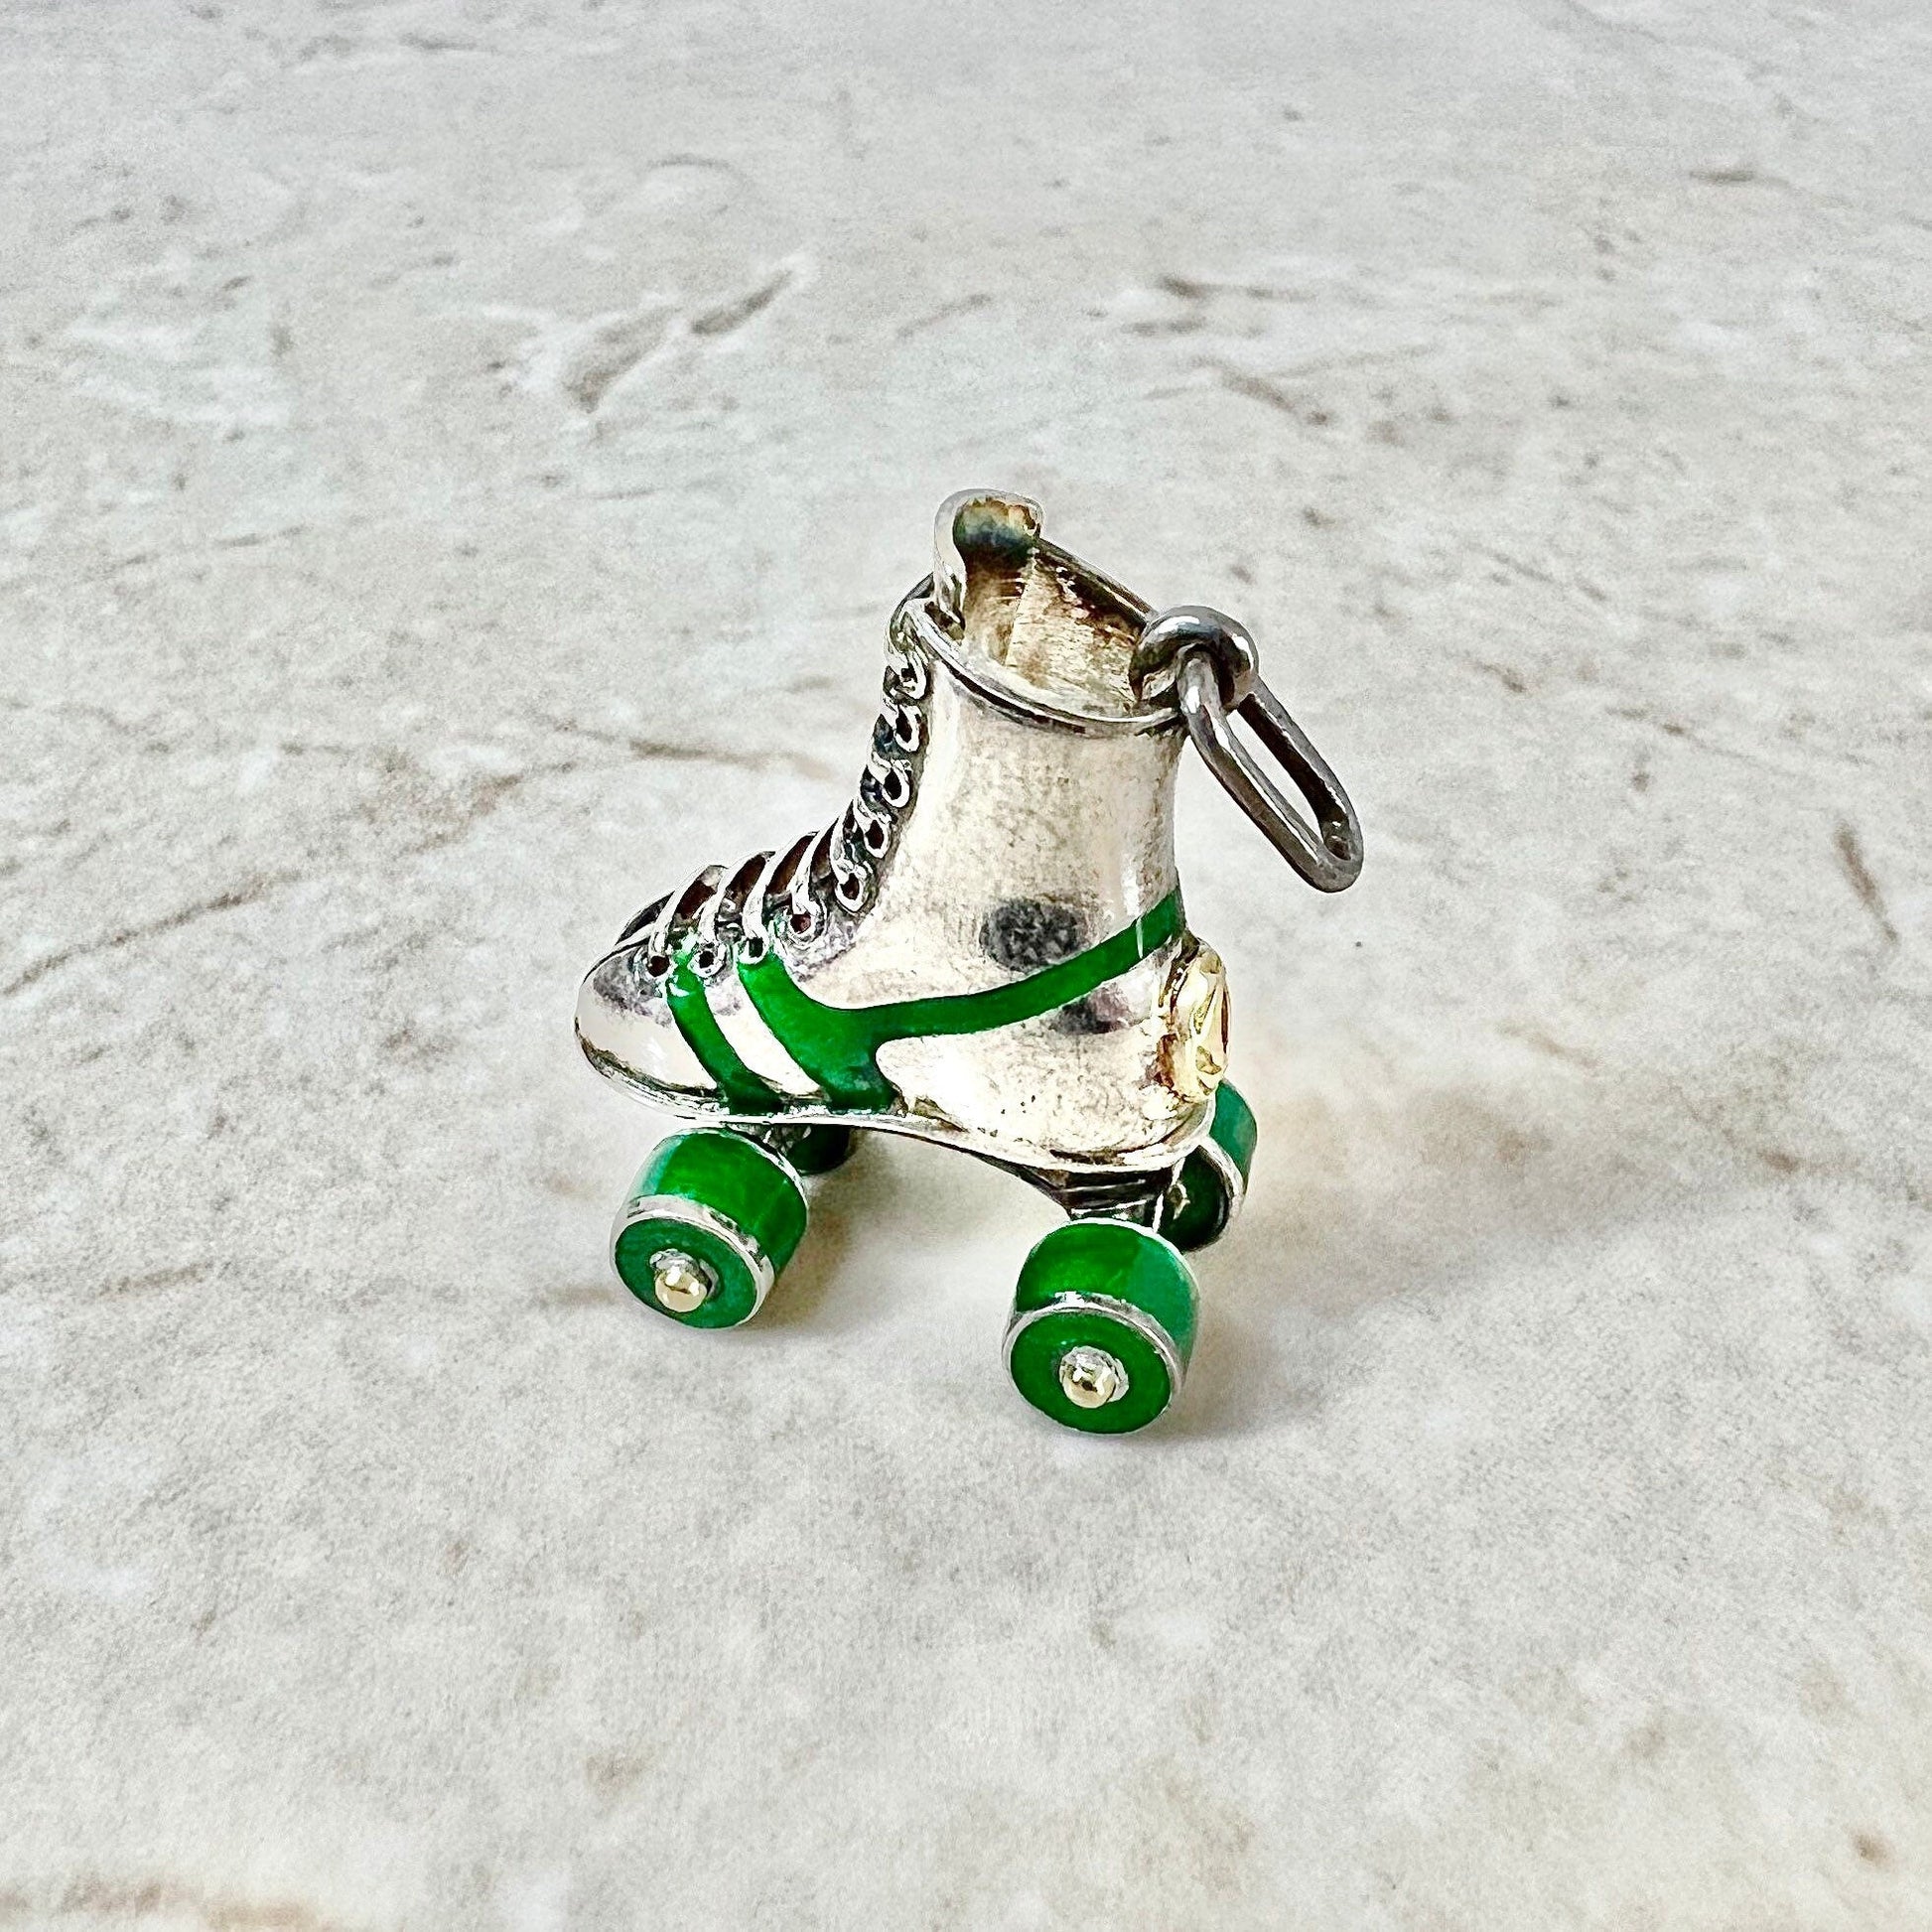 Vintage Cartier Charm In Sterling Silver & Enamel - Cartier Roller Skate Charm - Roller Skate Jewelry - Roller Skating Gifts - Silver Charm